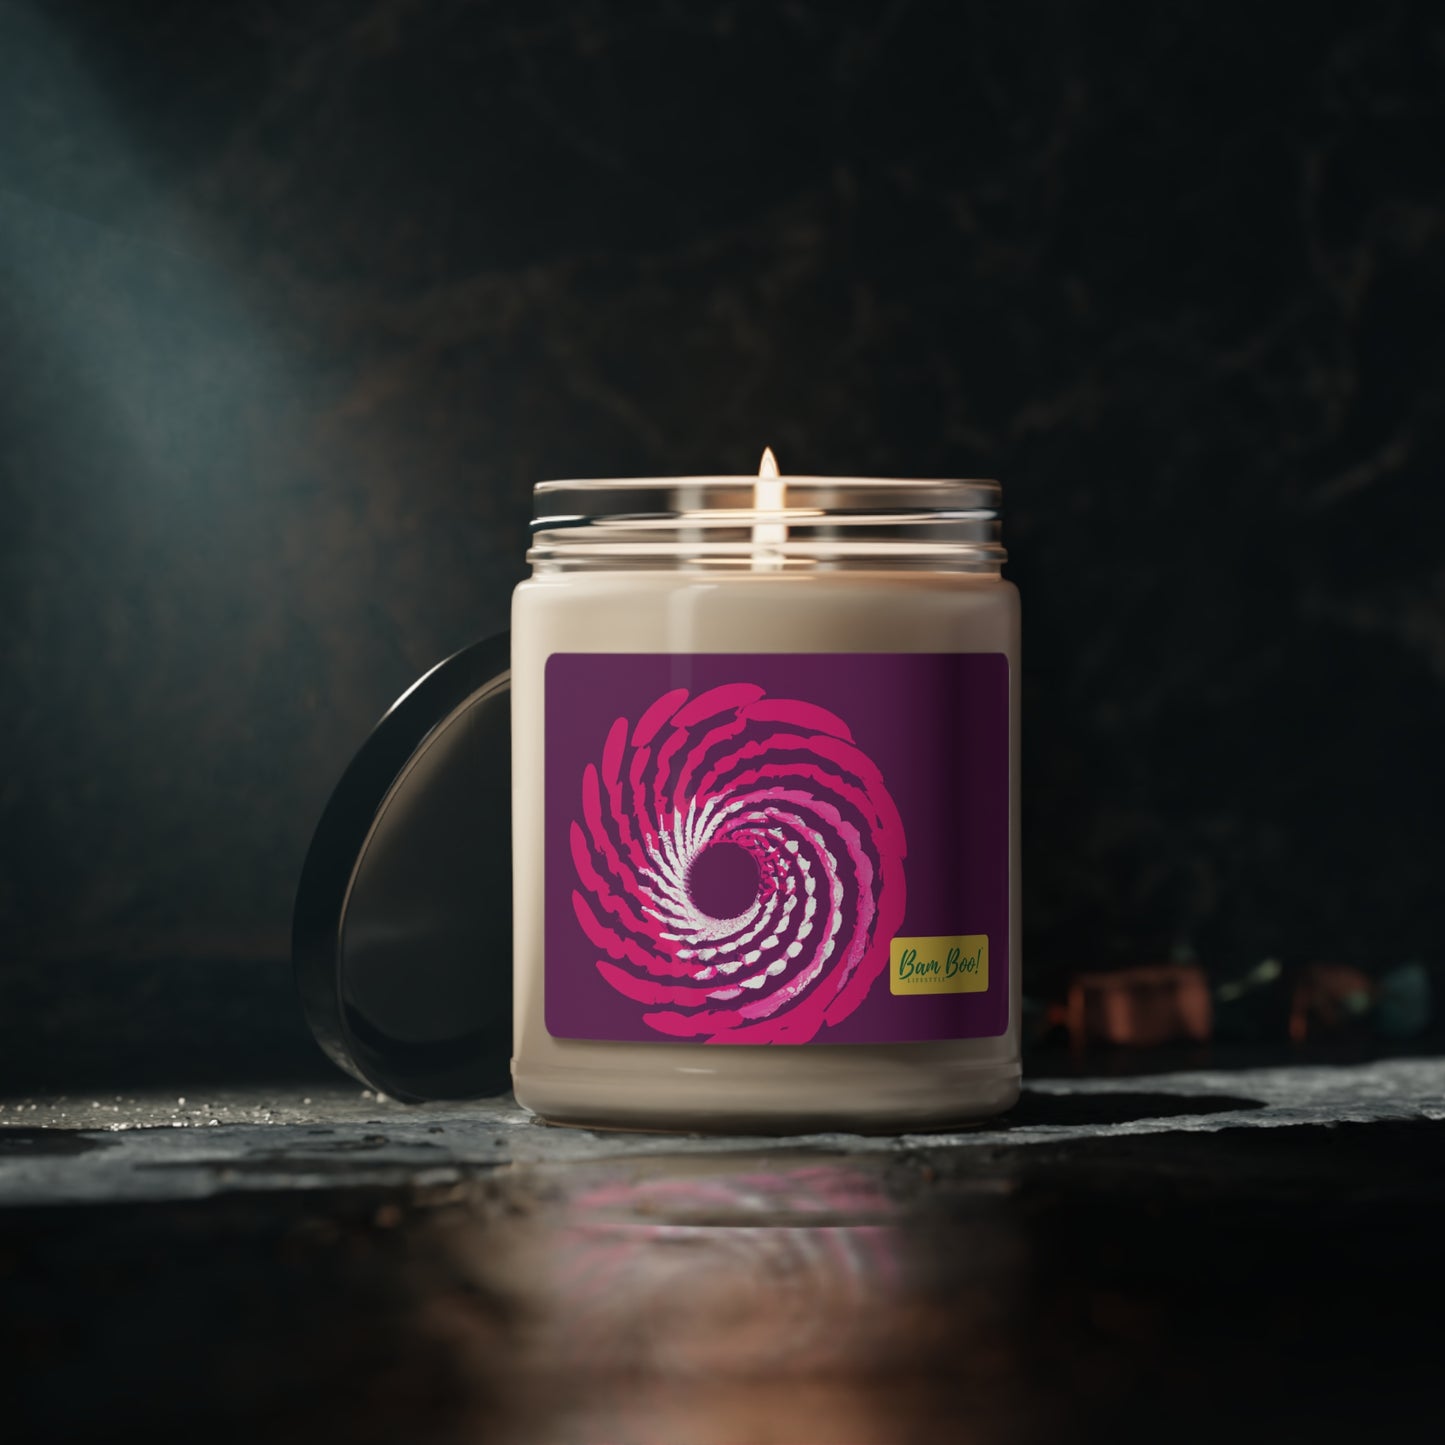 "Fusion of Art and Technology: A Hybrid Artistic Experience" - Bam Boo! Lifestyle Eco-friendly Soy Candle